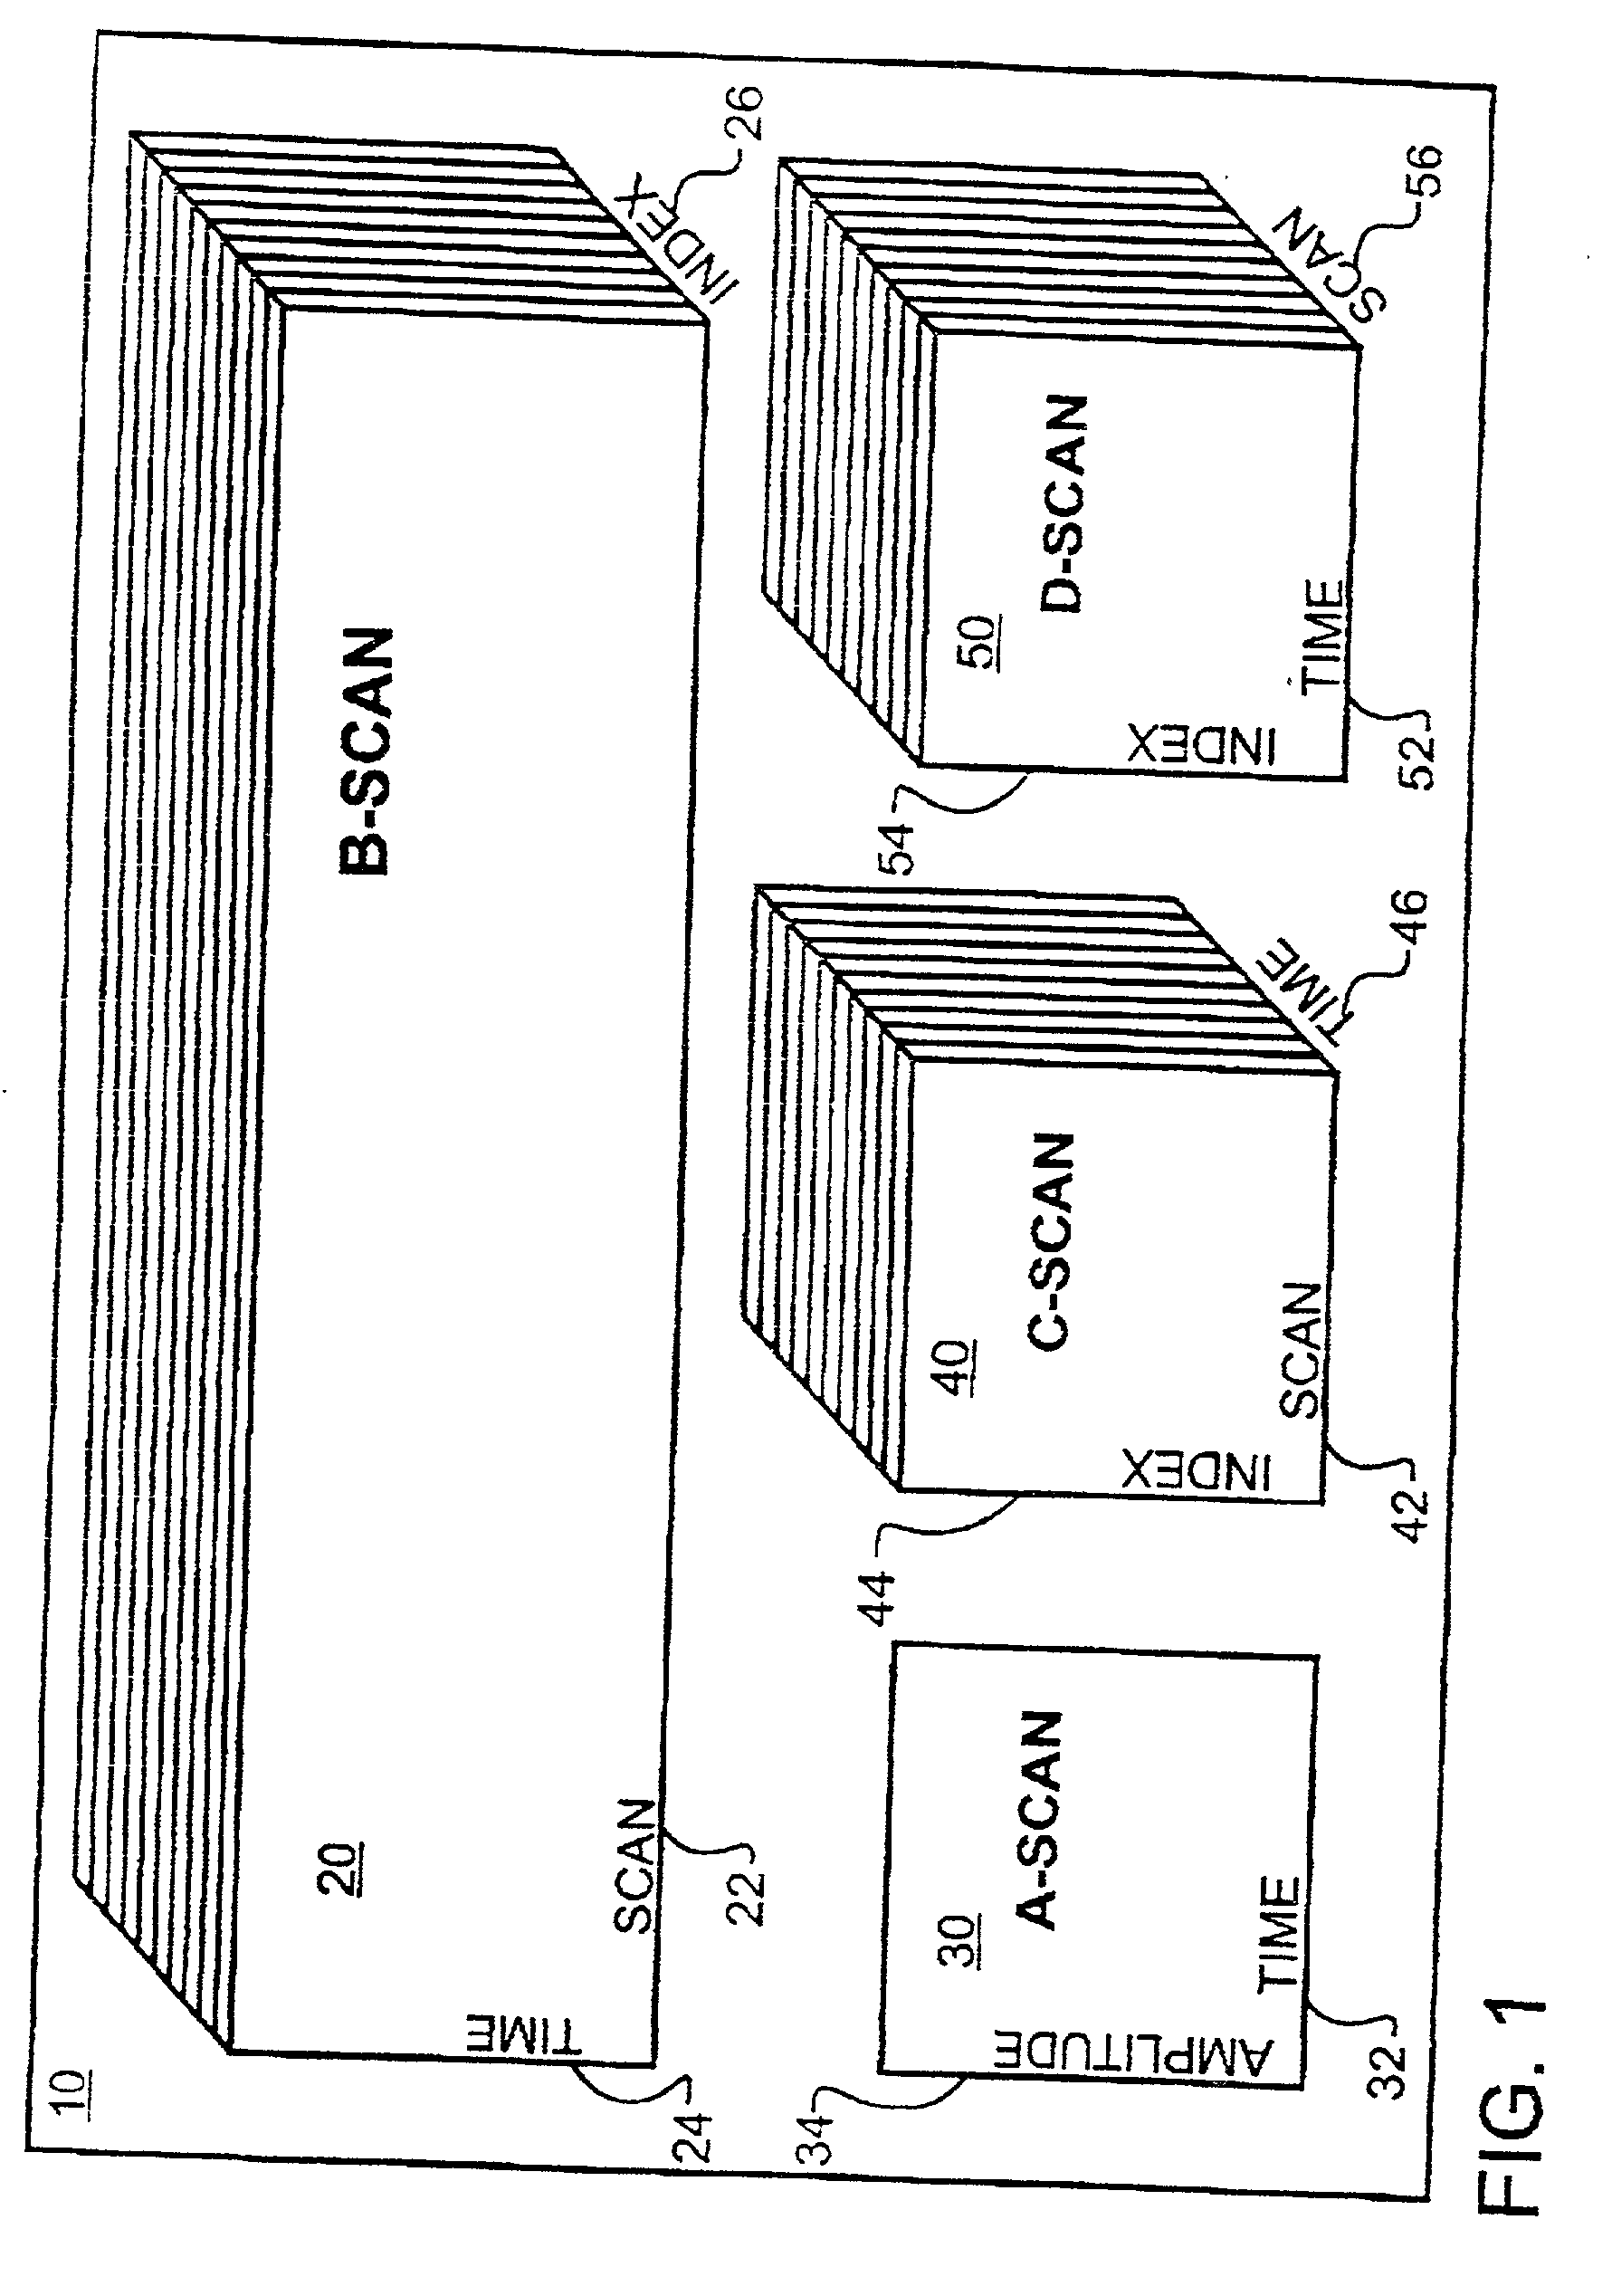 Method for sizing surface breaking discontinuities with ultrasonic imaging